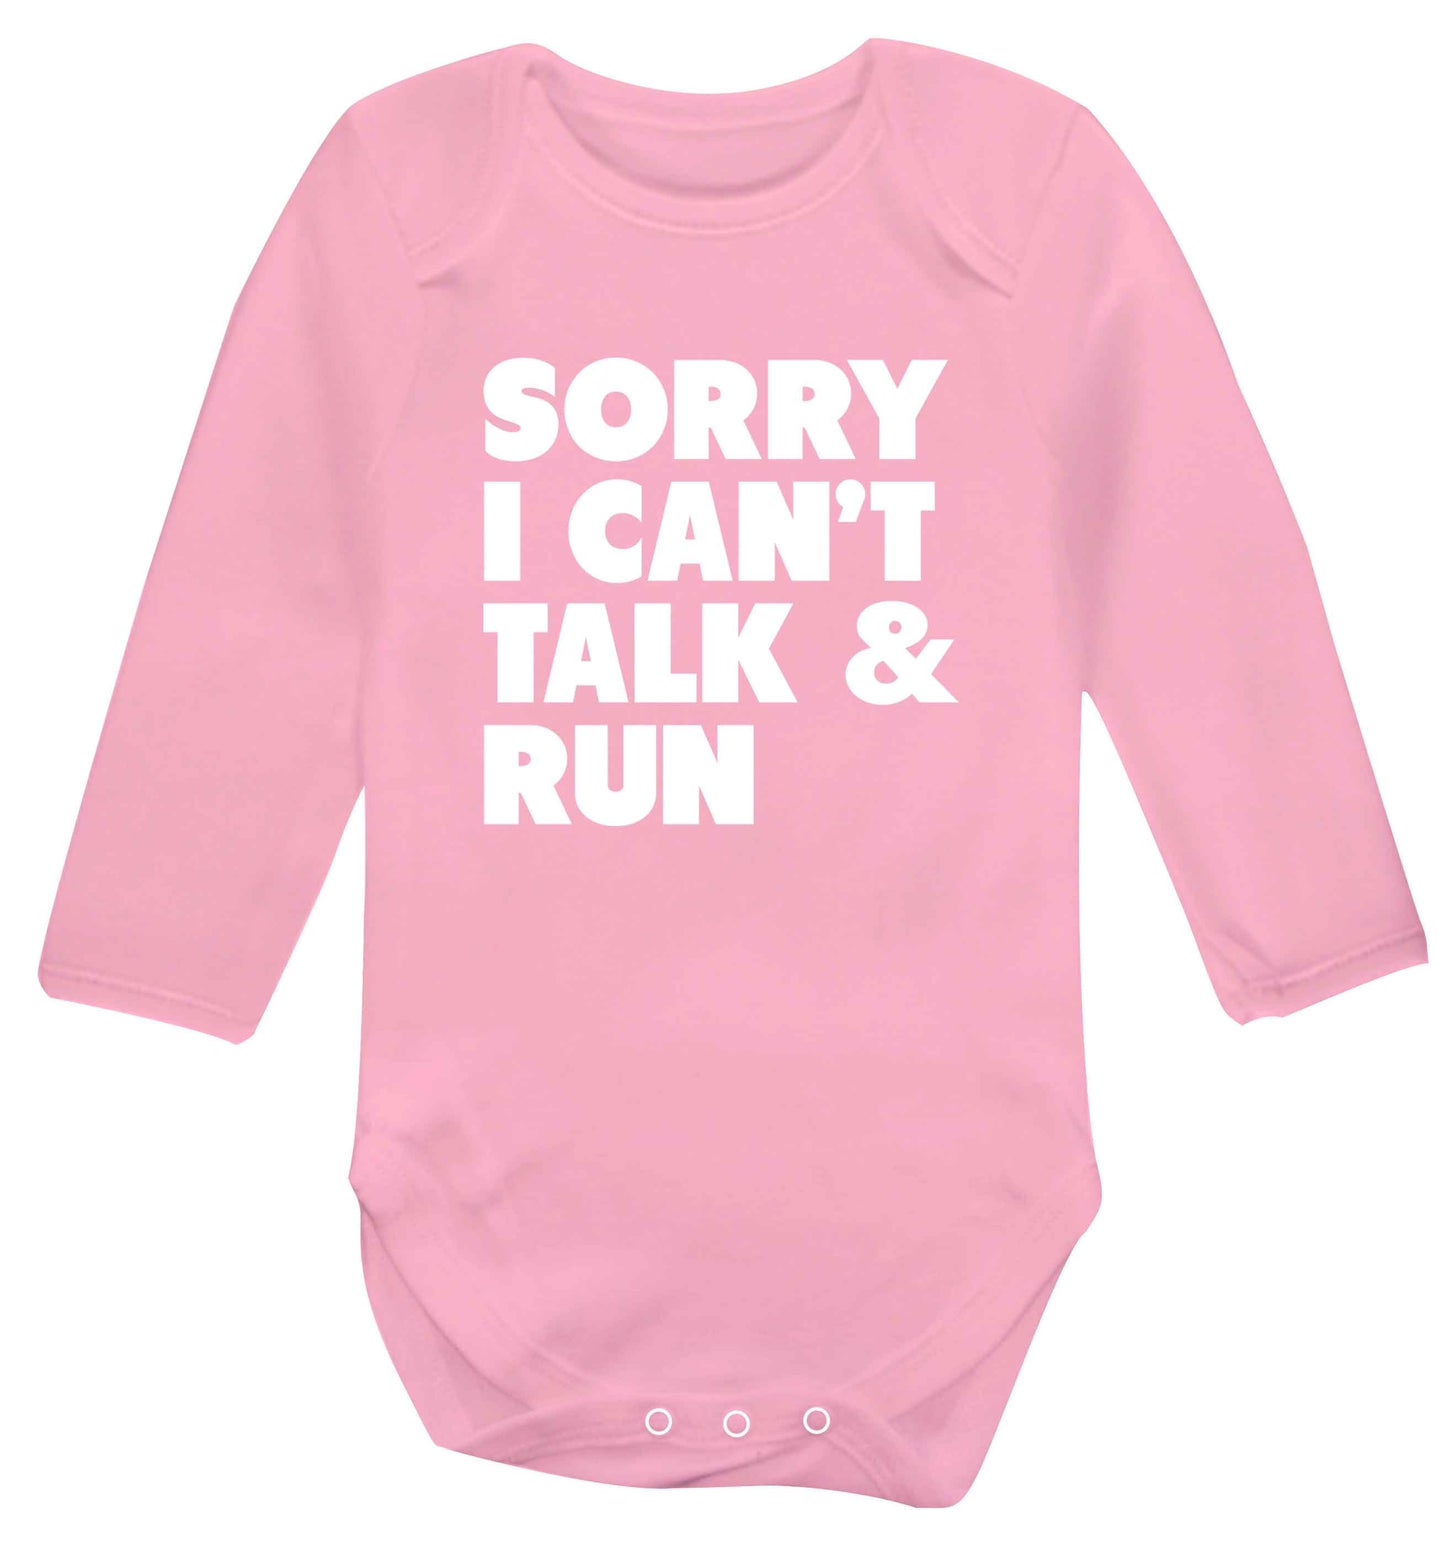 Sorry I can't talk and run baby vest long sleeved pale pink 6-12 months